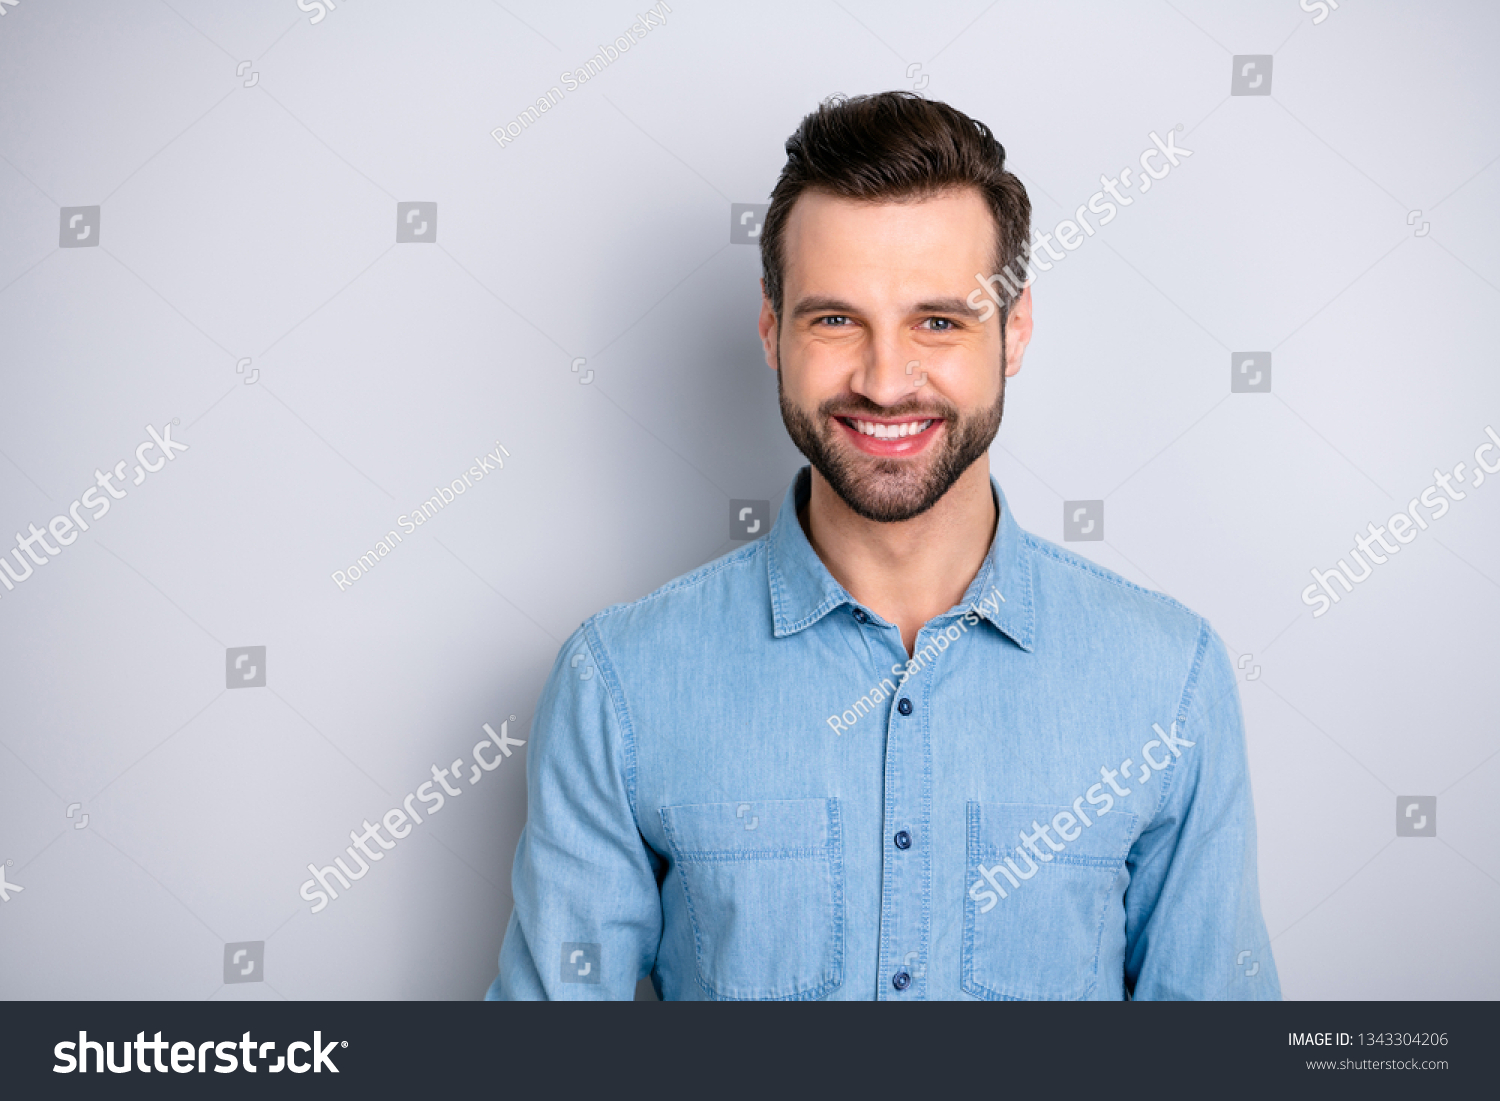 Close up photo amazing attractive he him his guy gladly toothy smiling self-confidently look camera easy-going wearing casual jeans denim shirt outfit clothes isolated grey background #1343304206